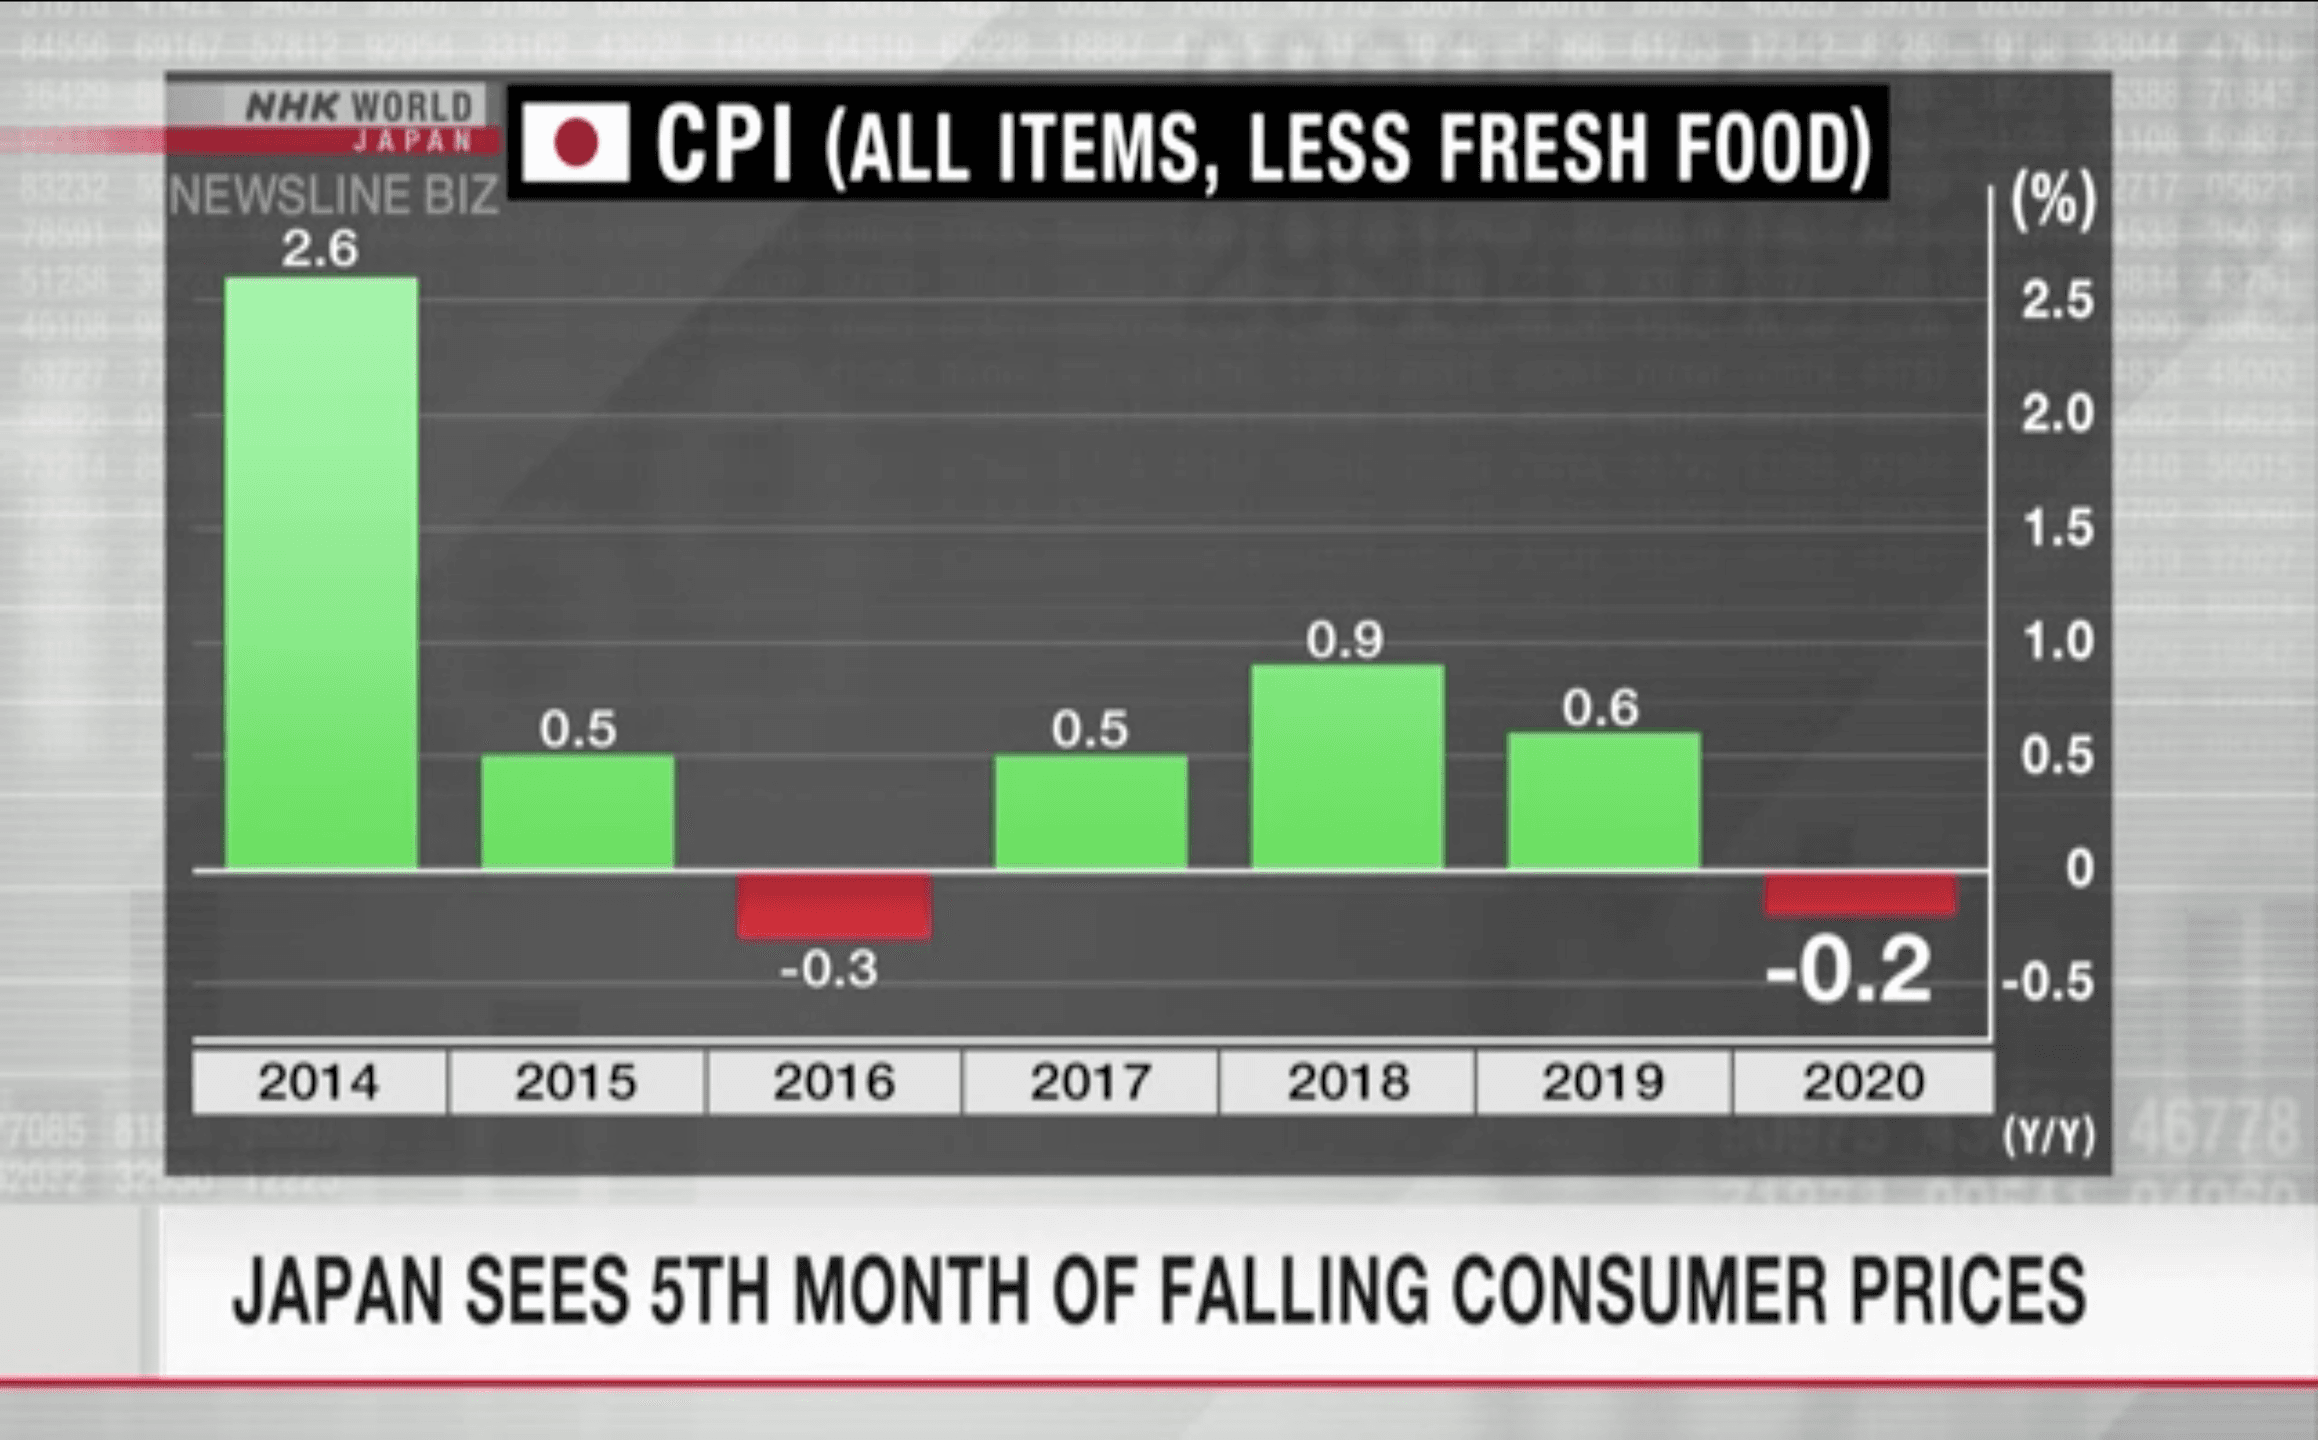 Japan sees 5th month of falling consumer prices